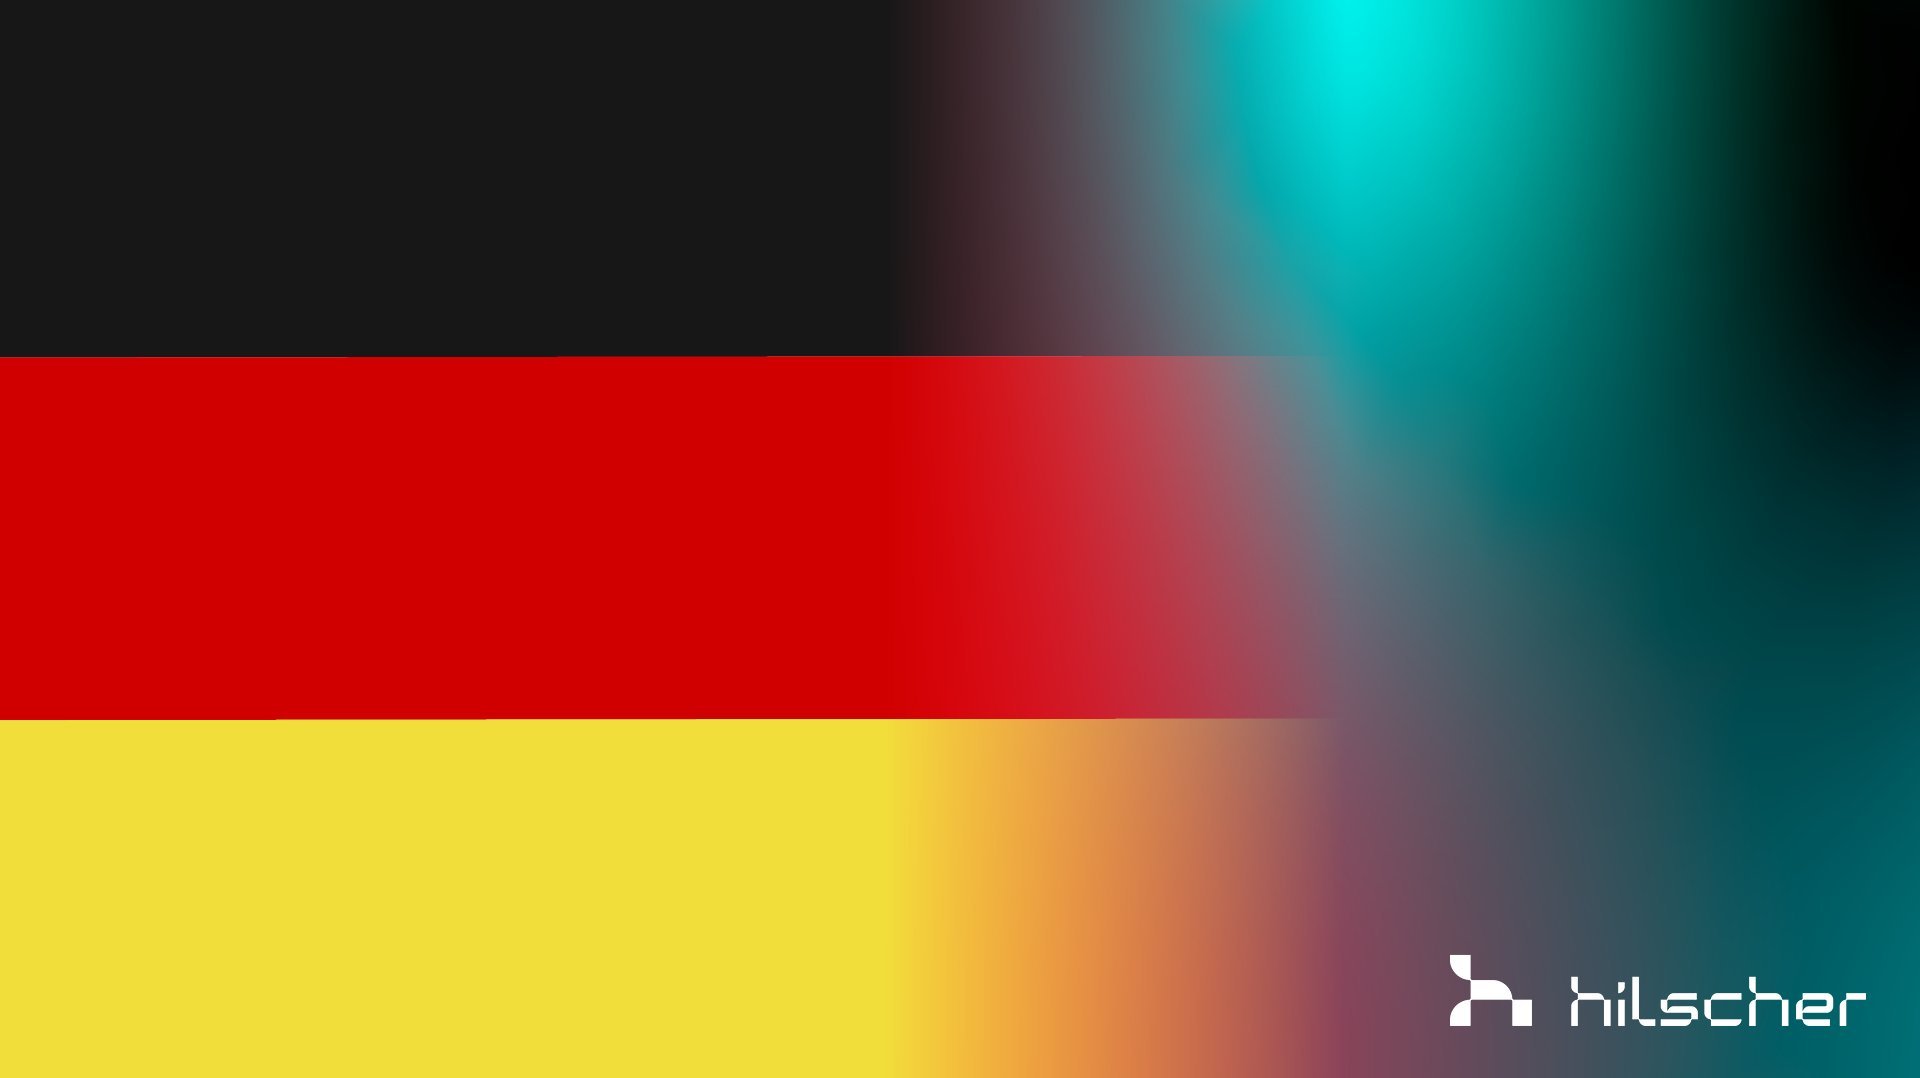 The flag of Germany. On the right side of the picture is a fade to a colorful space, accounting for nearly a quarter of the image.